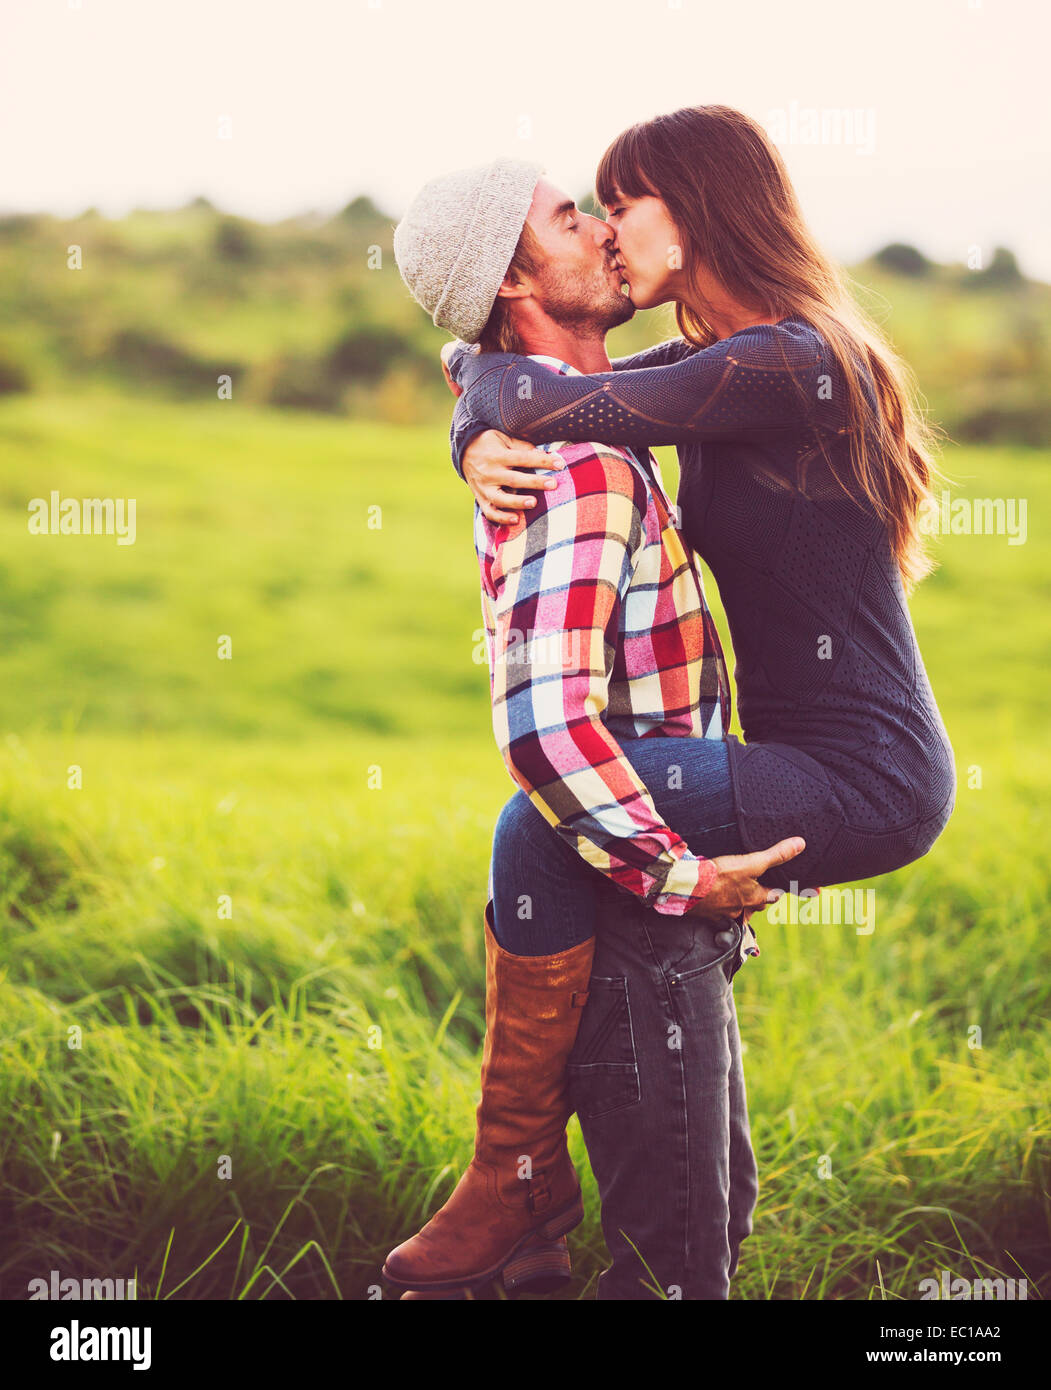 Happy Romantic Young Couple in Love Outdoors Stock Photo